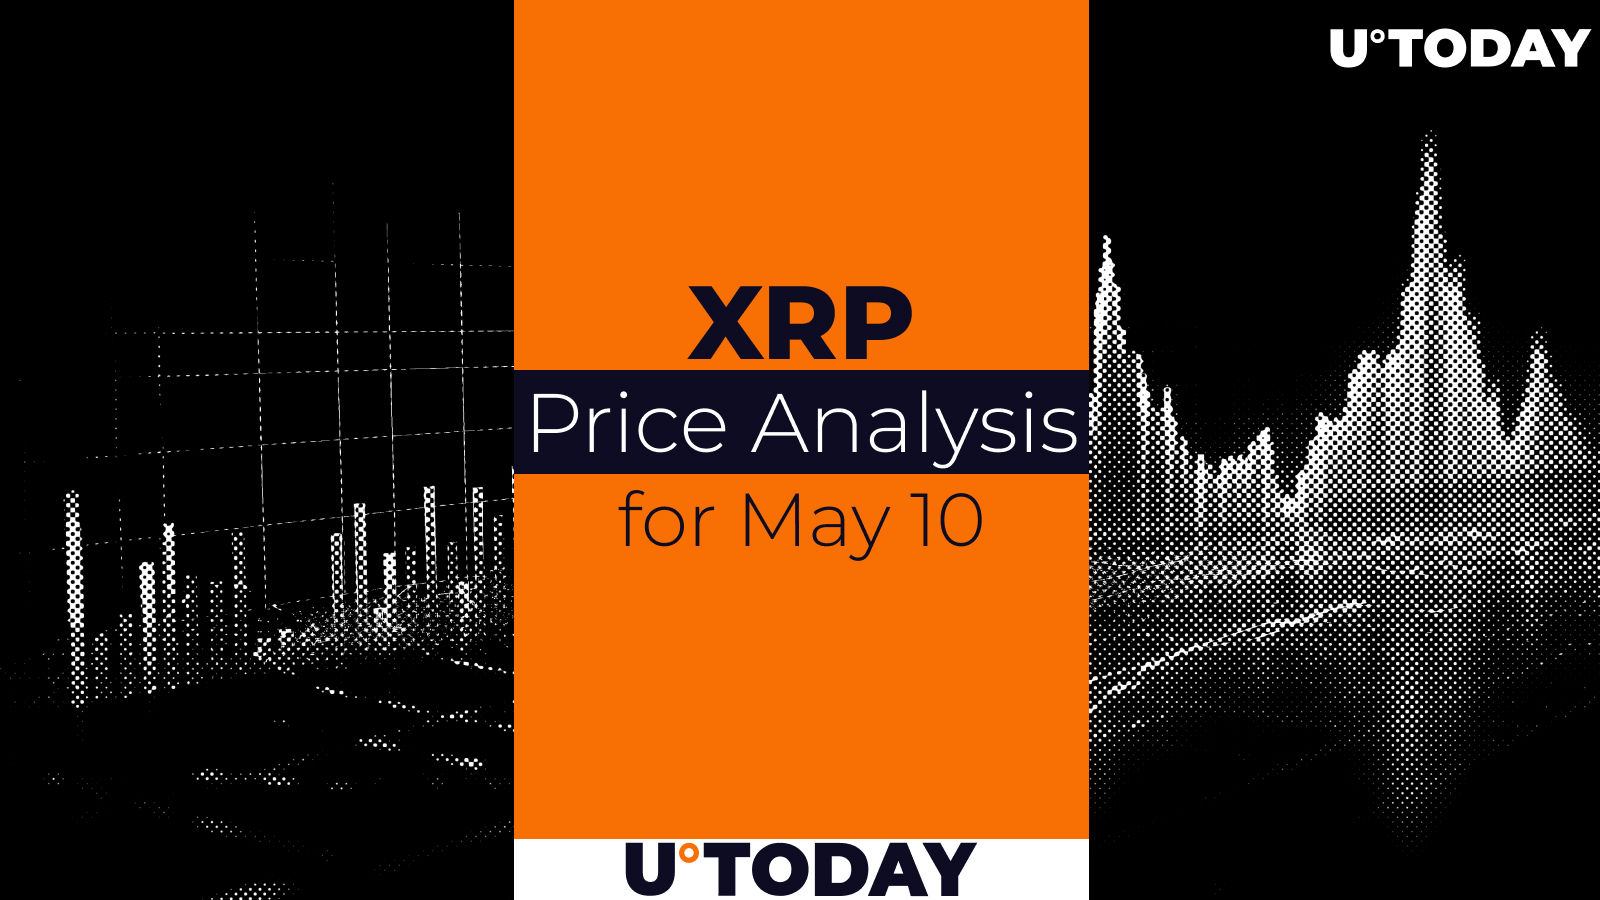 XRP Price Prediction for May 10